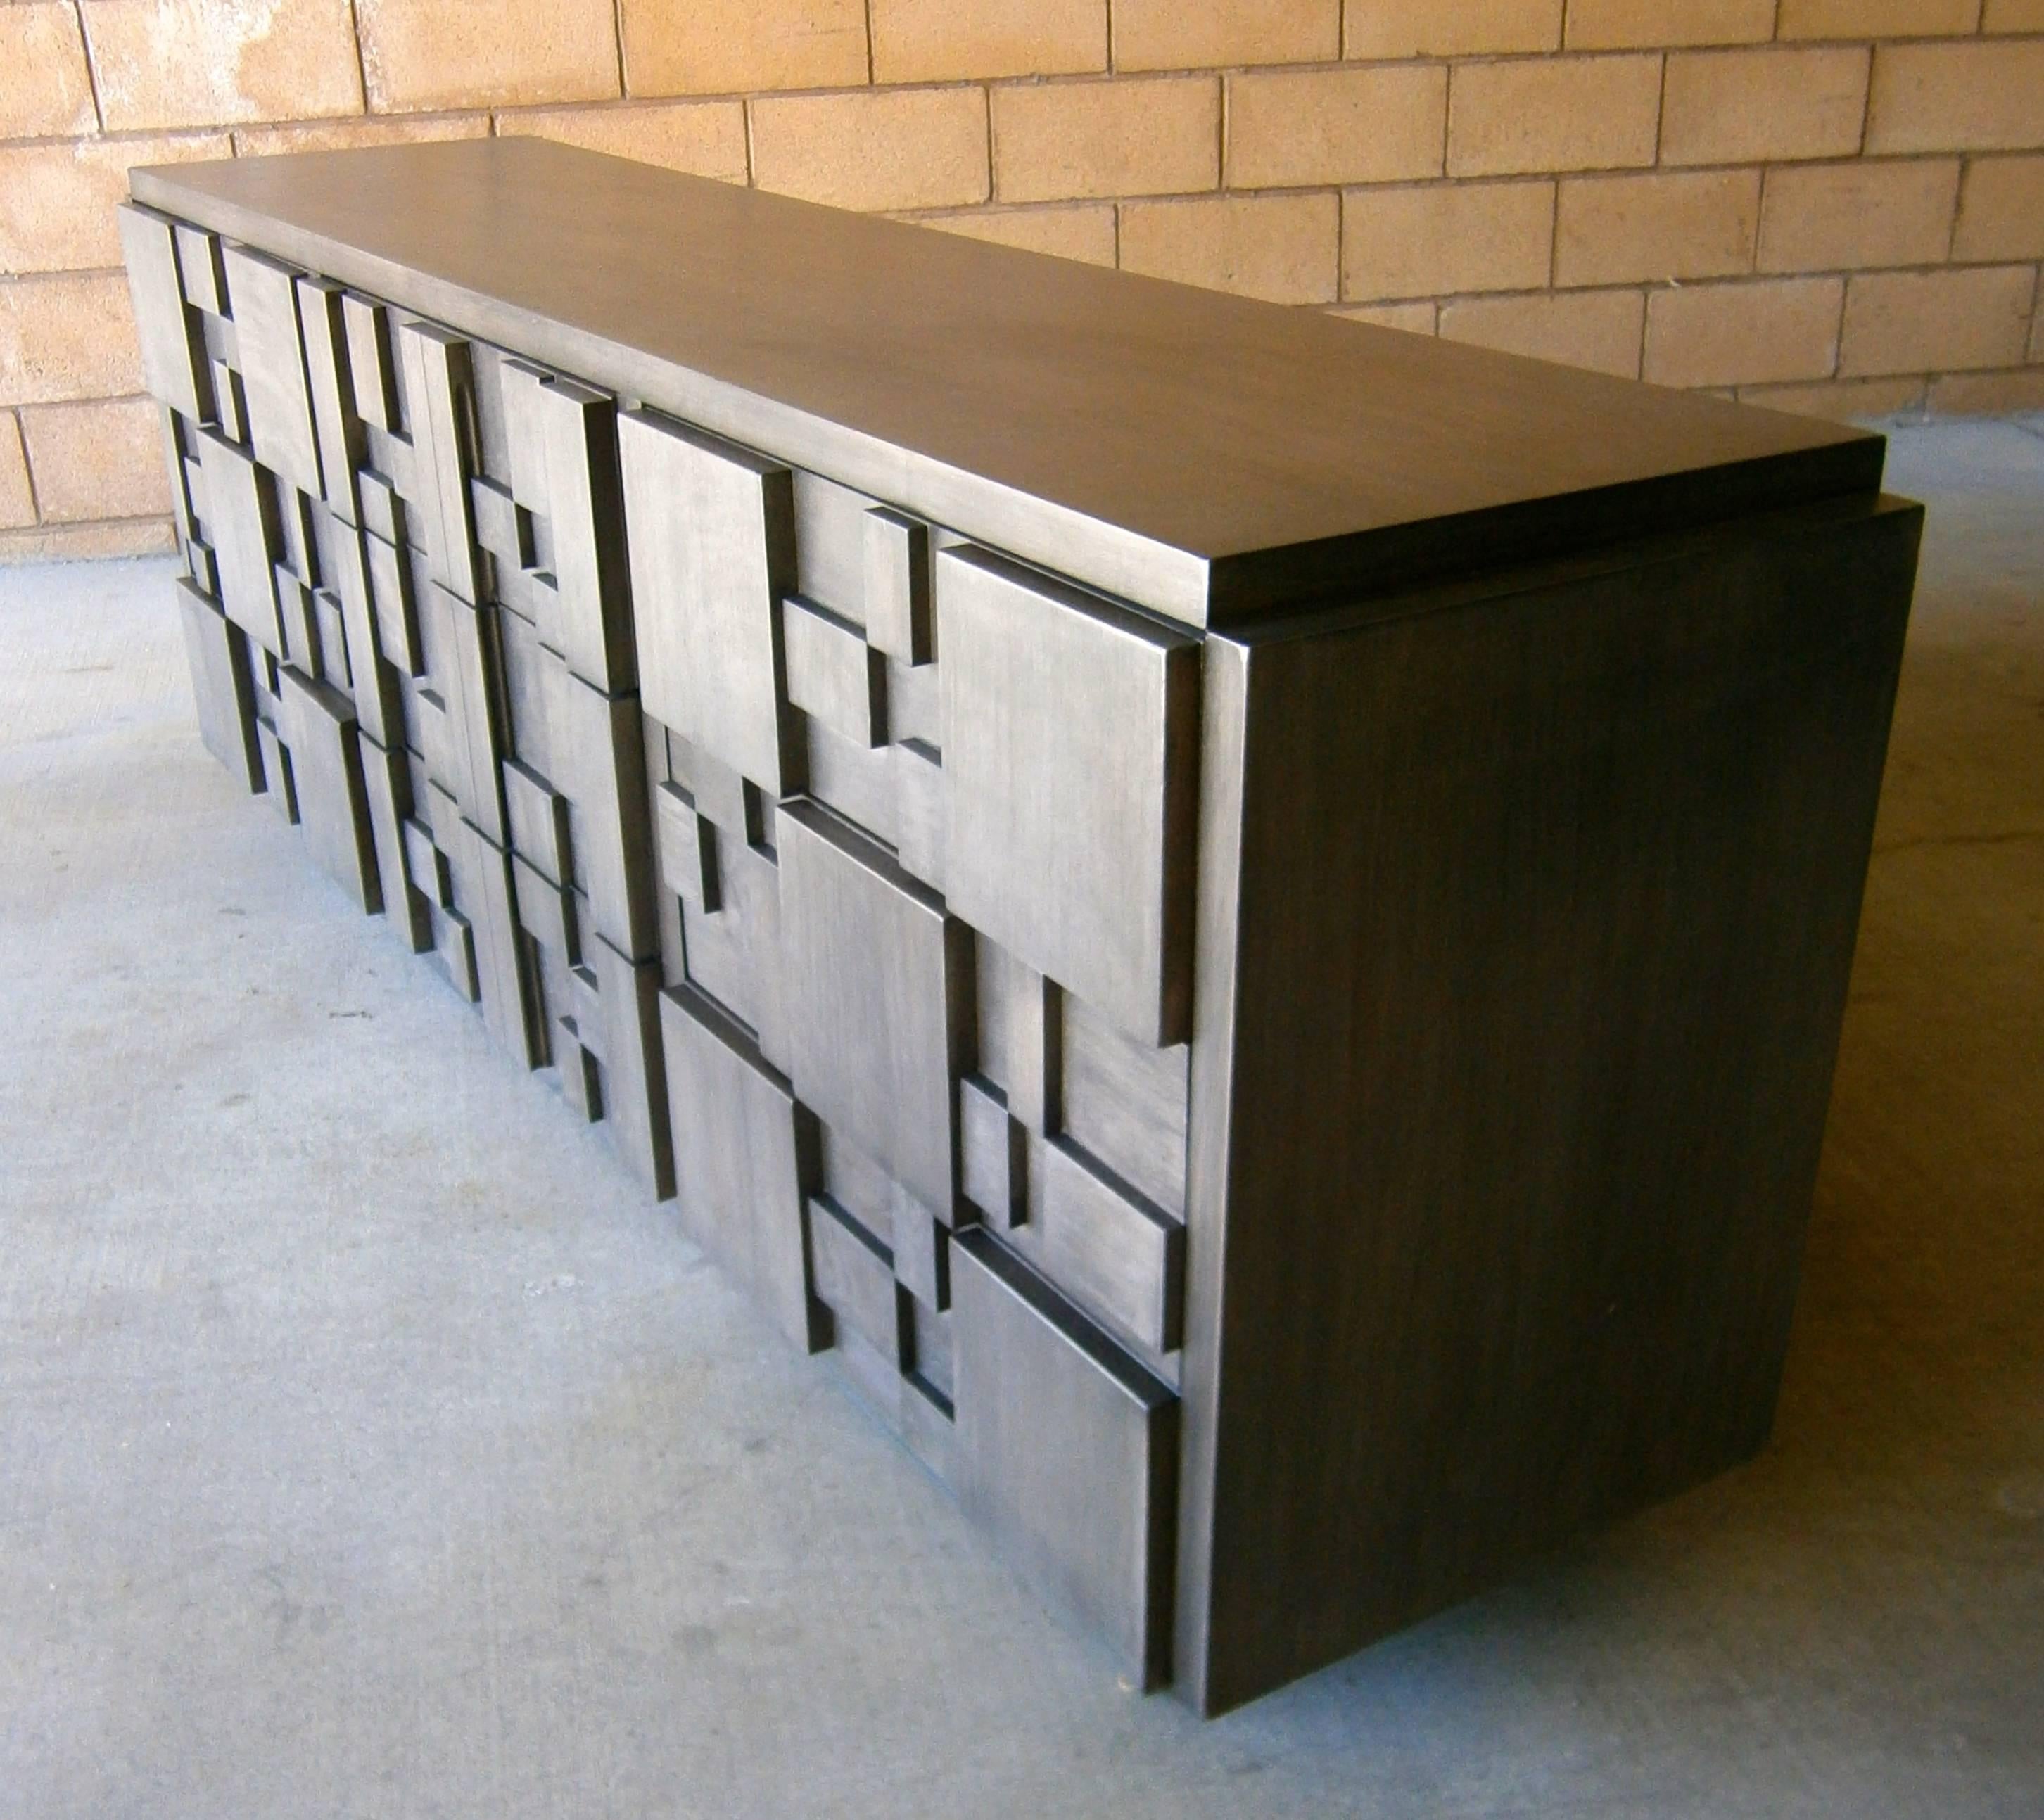 A nine-drawer cubist inspired mahogany chest manufactured by Lane Furniture in the 1970s. The chest has been newly restored with a gray-stained finish which allows the grain of the wood to show through.